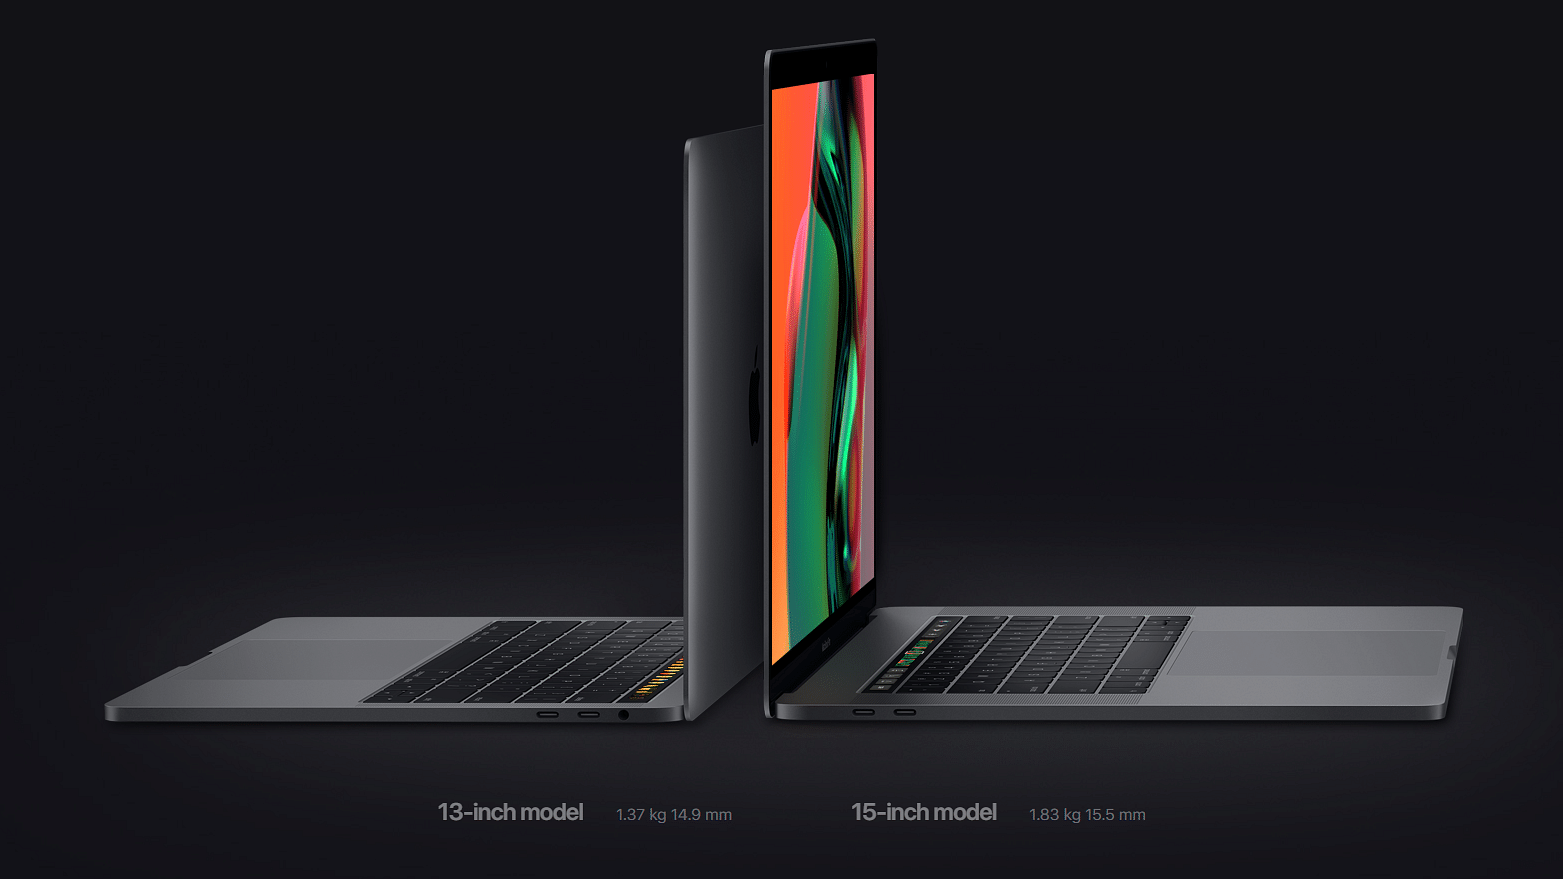 The new MacBook comes with more storage.